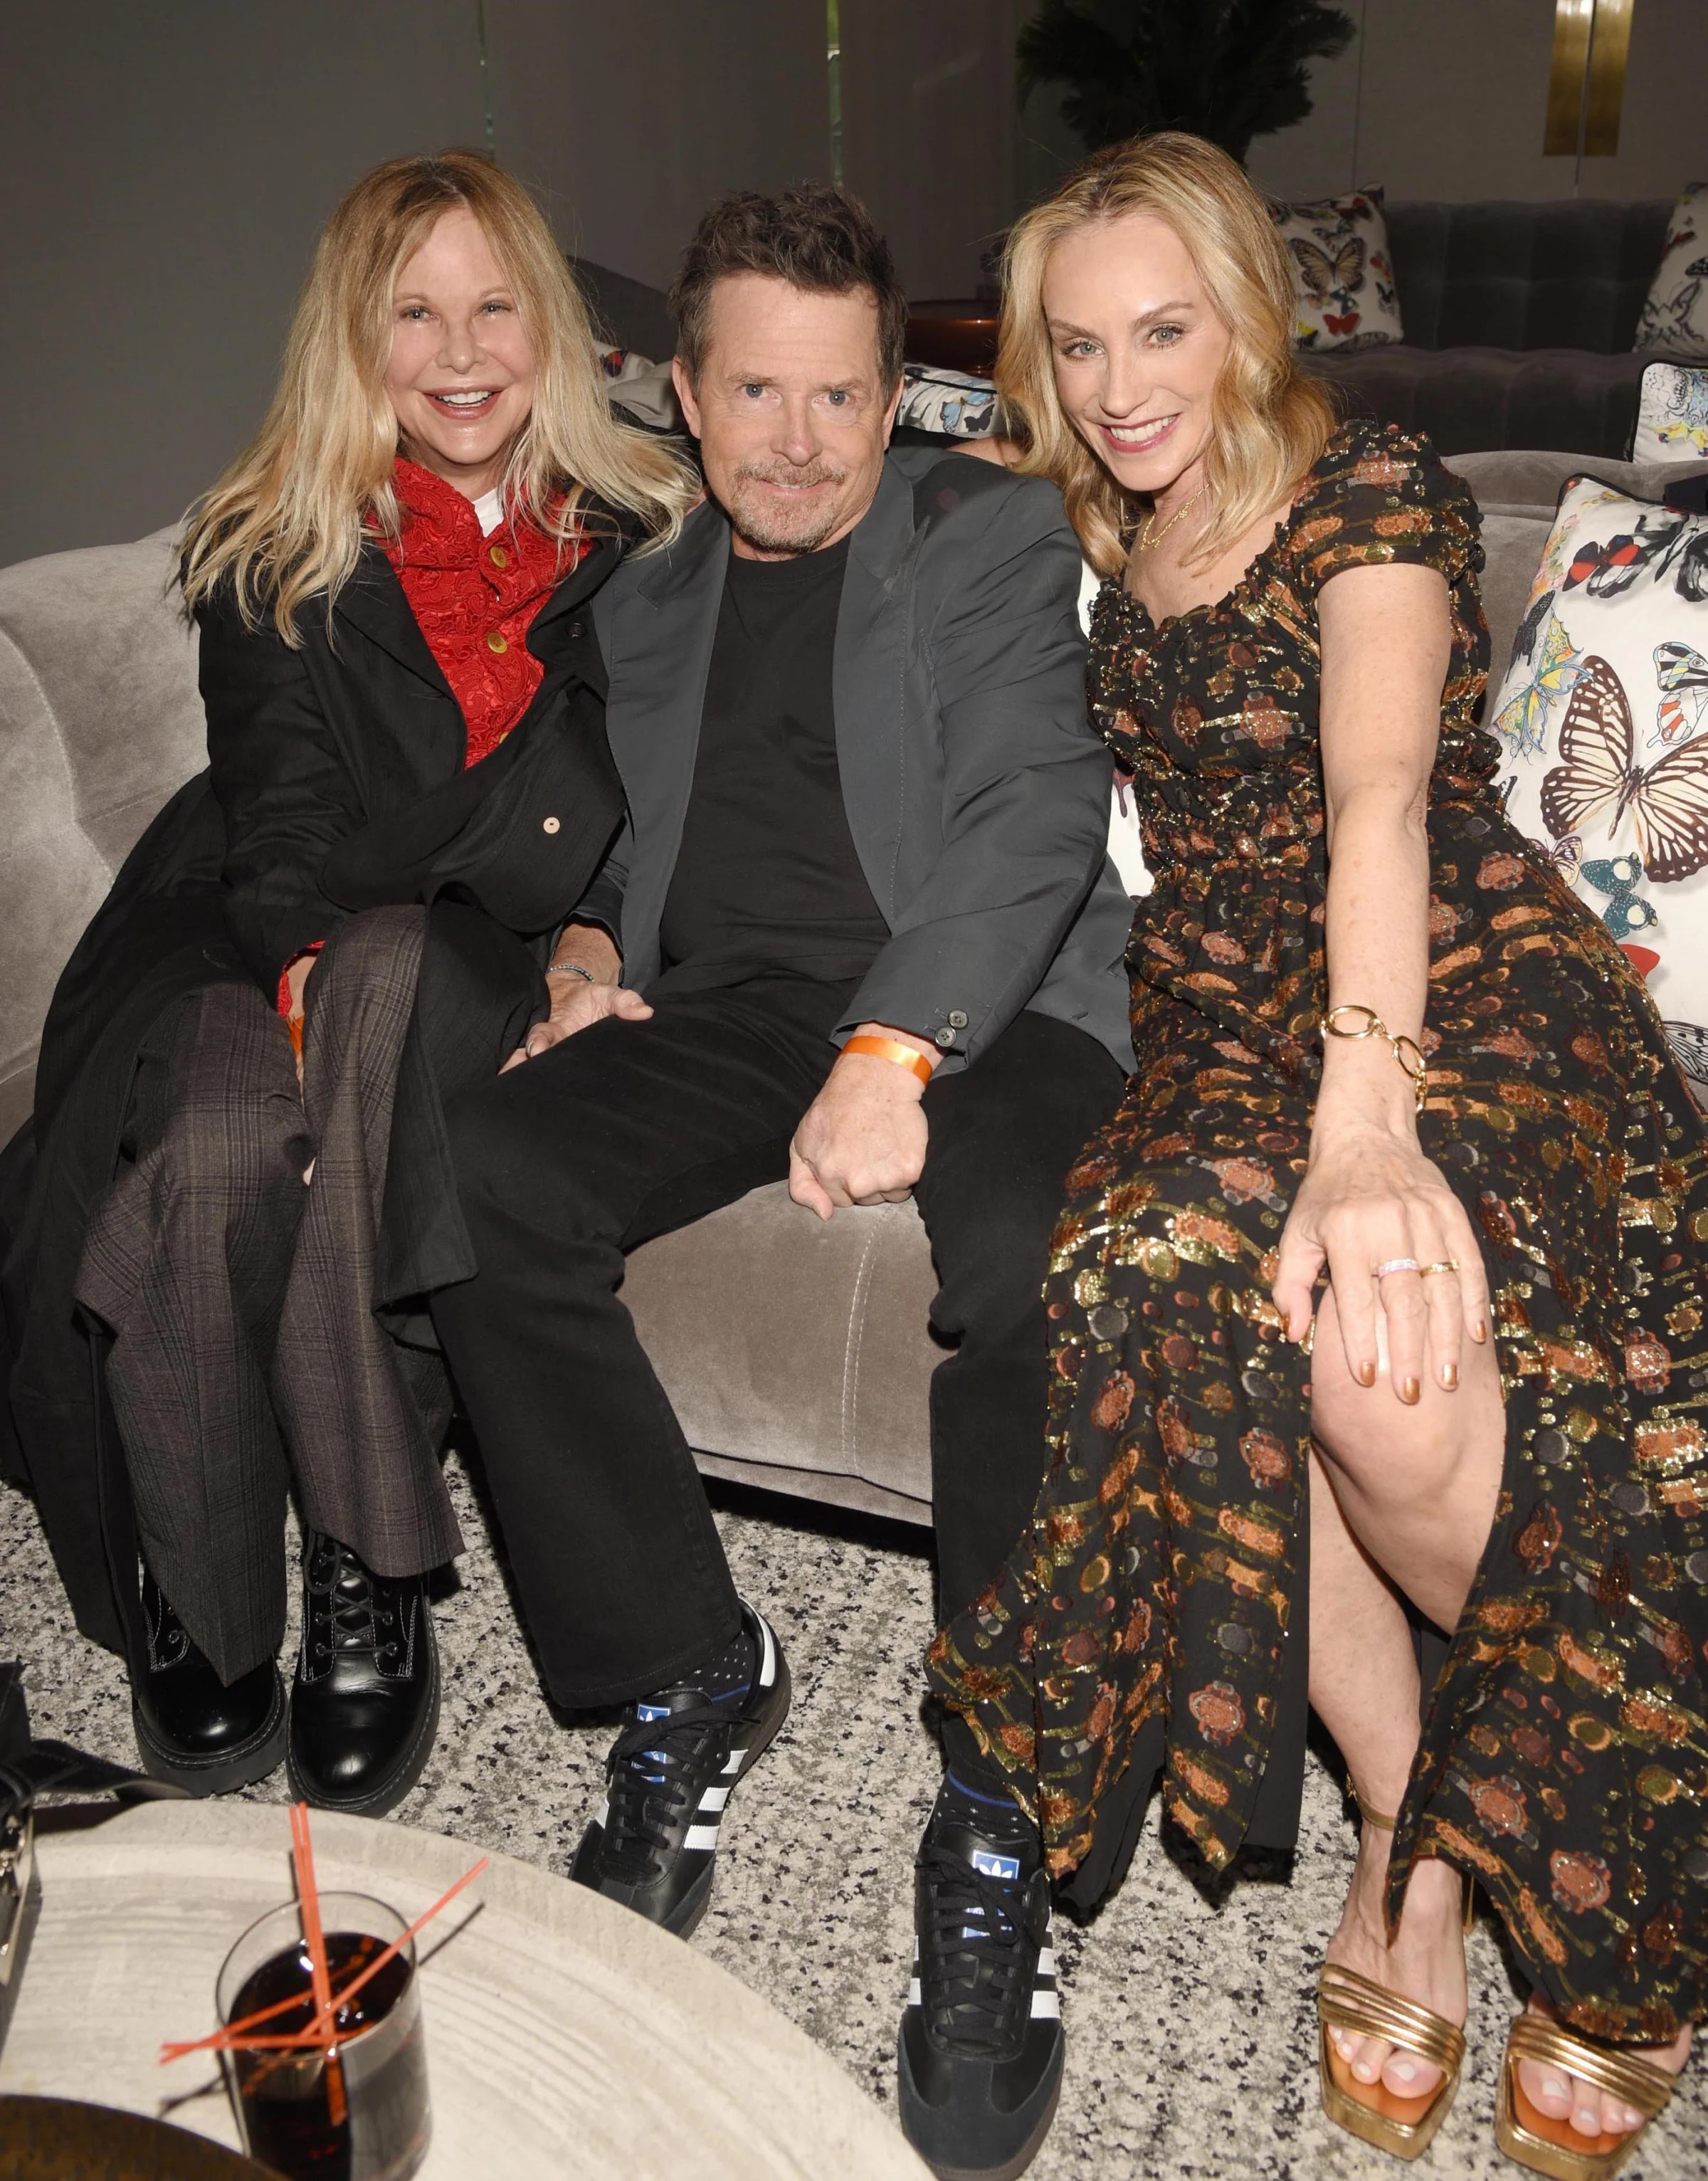 Meg Ryan smiling with Michael J. Fox and Tracy Pollan